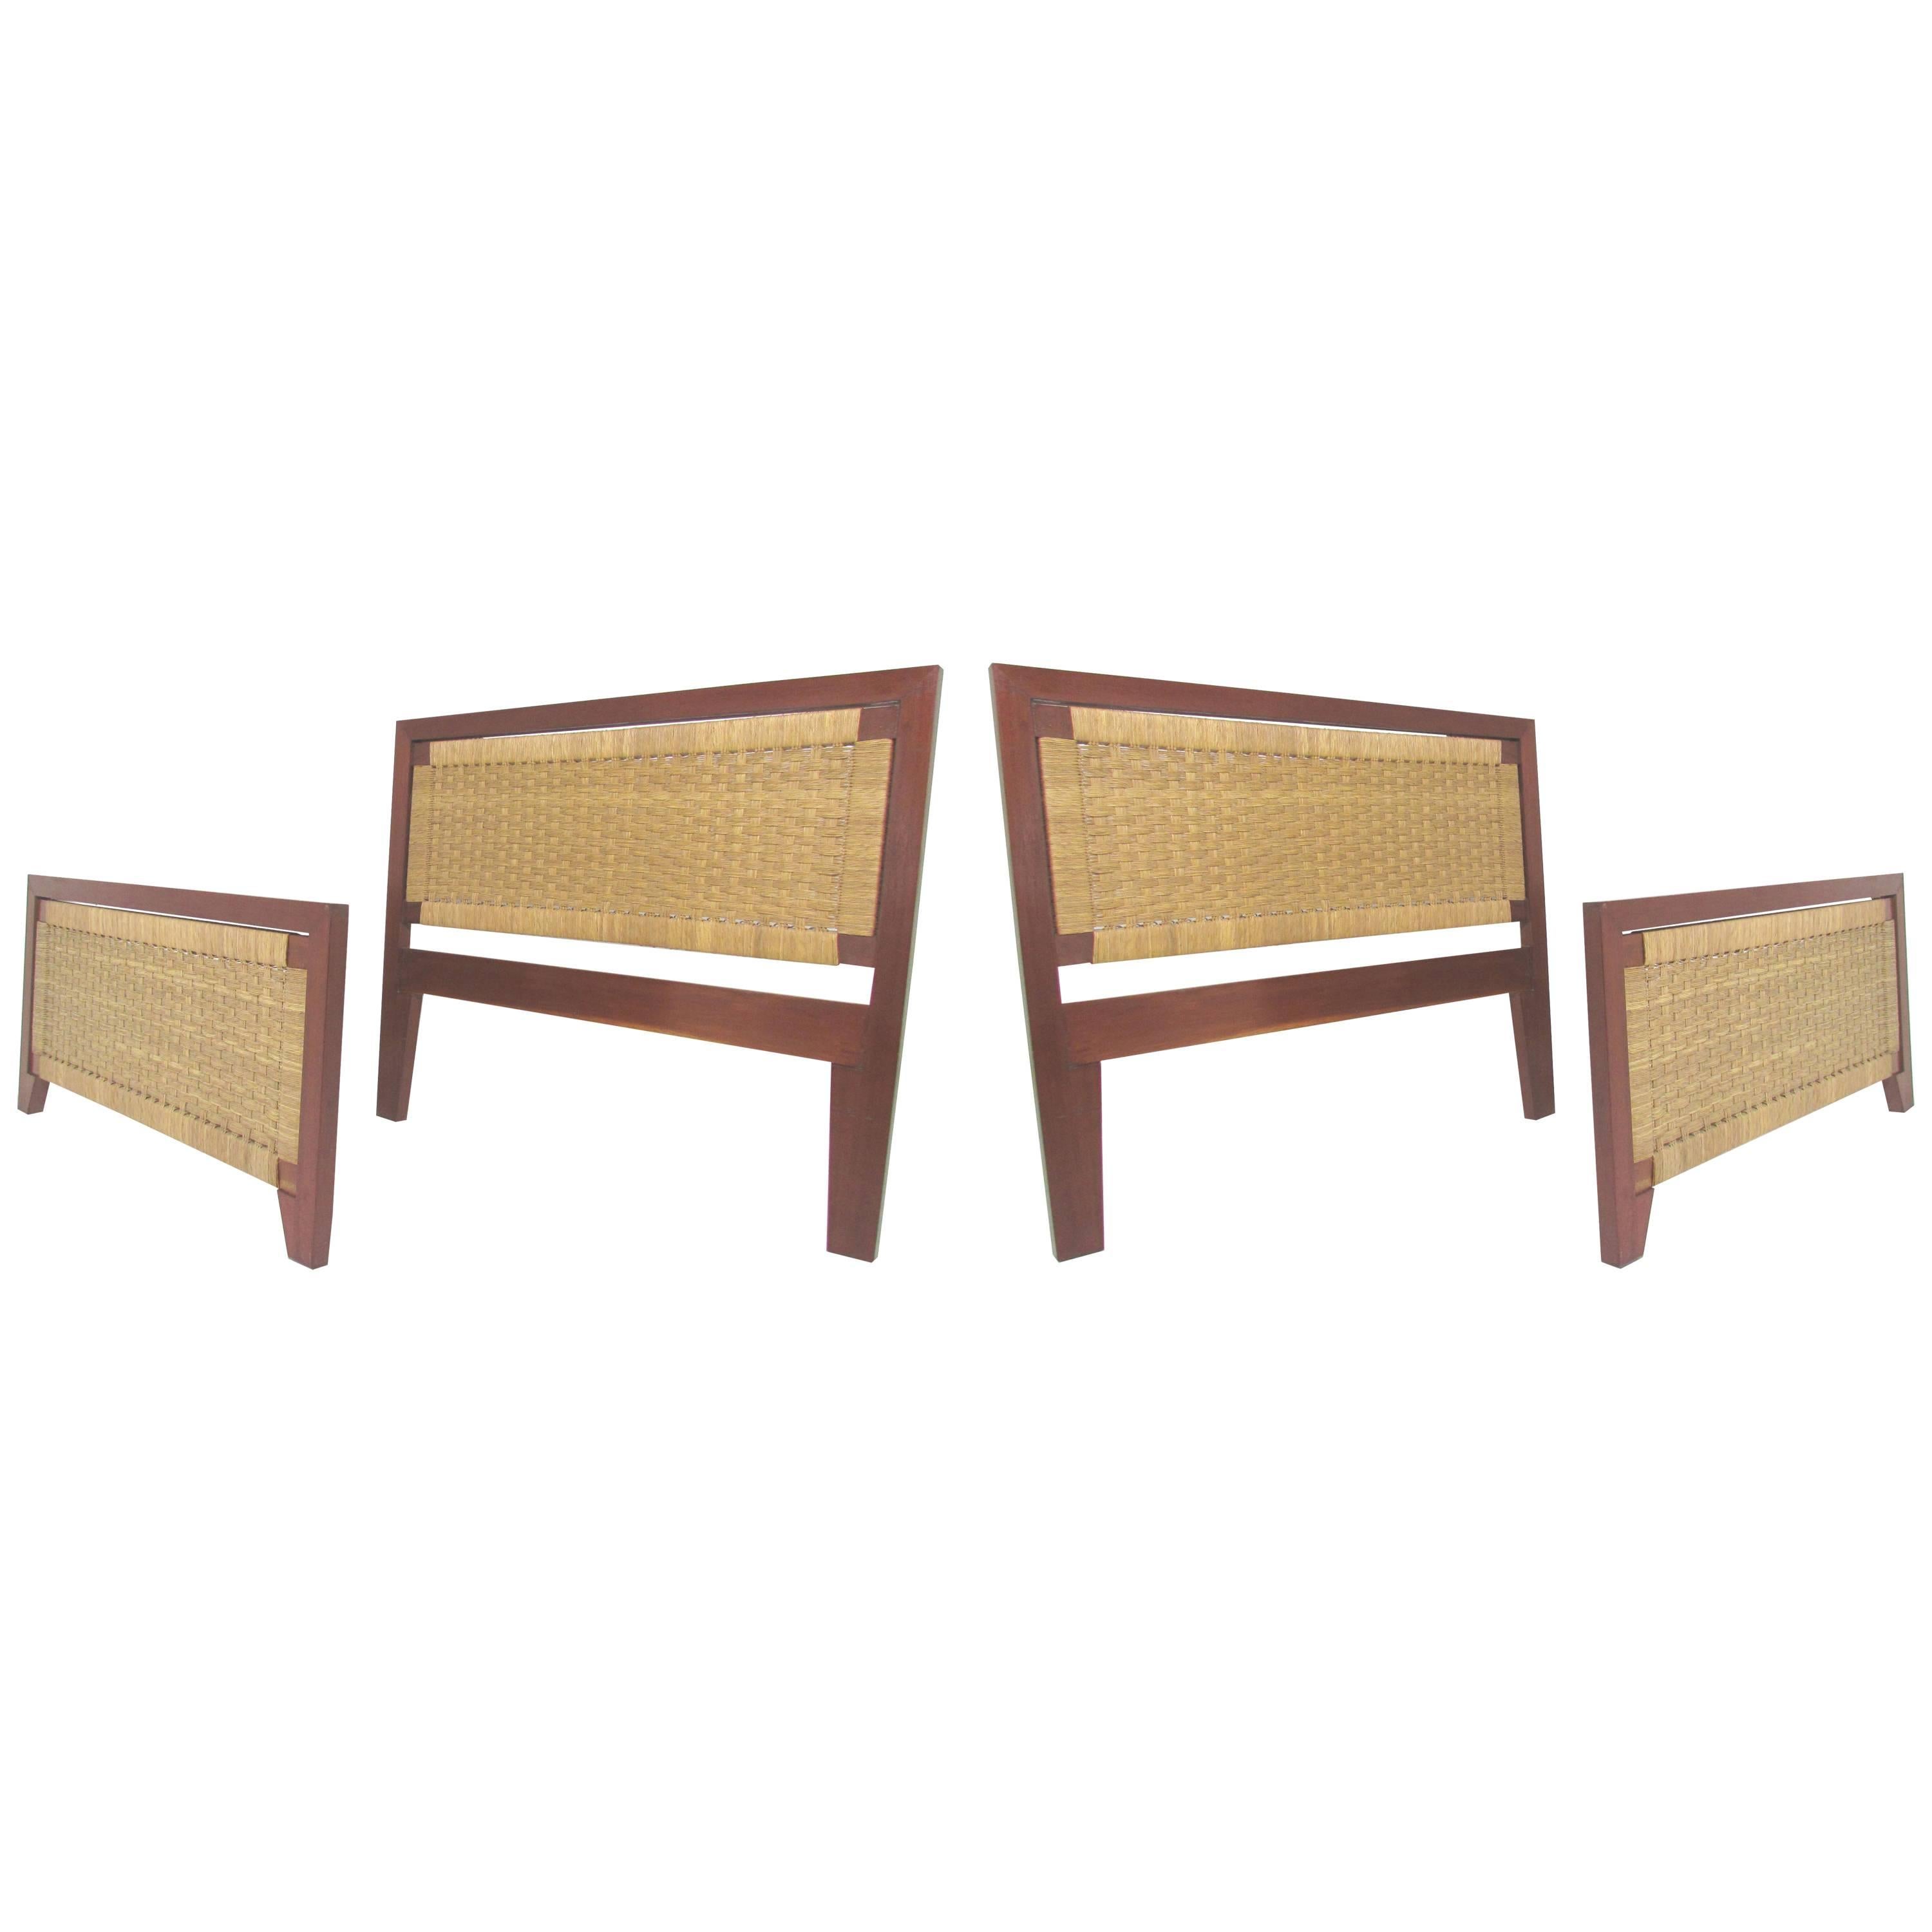 Pair of Mexican Mid-Century Single Beds with Handwoven Cane, circa 1950s